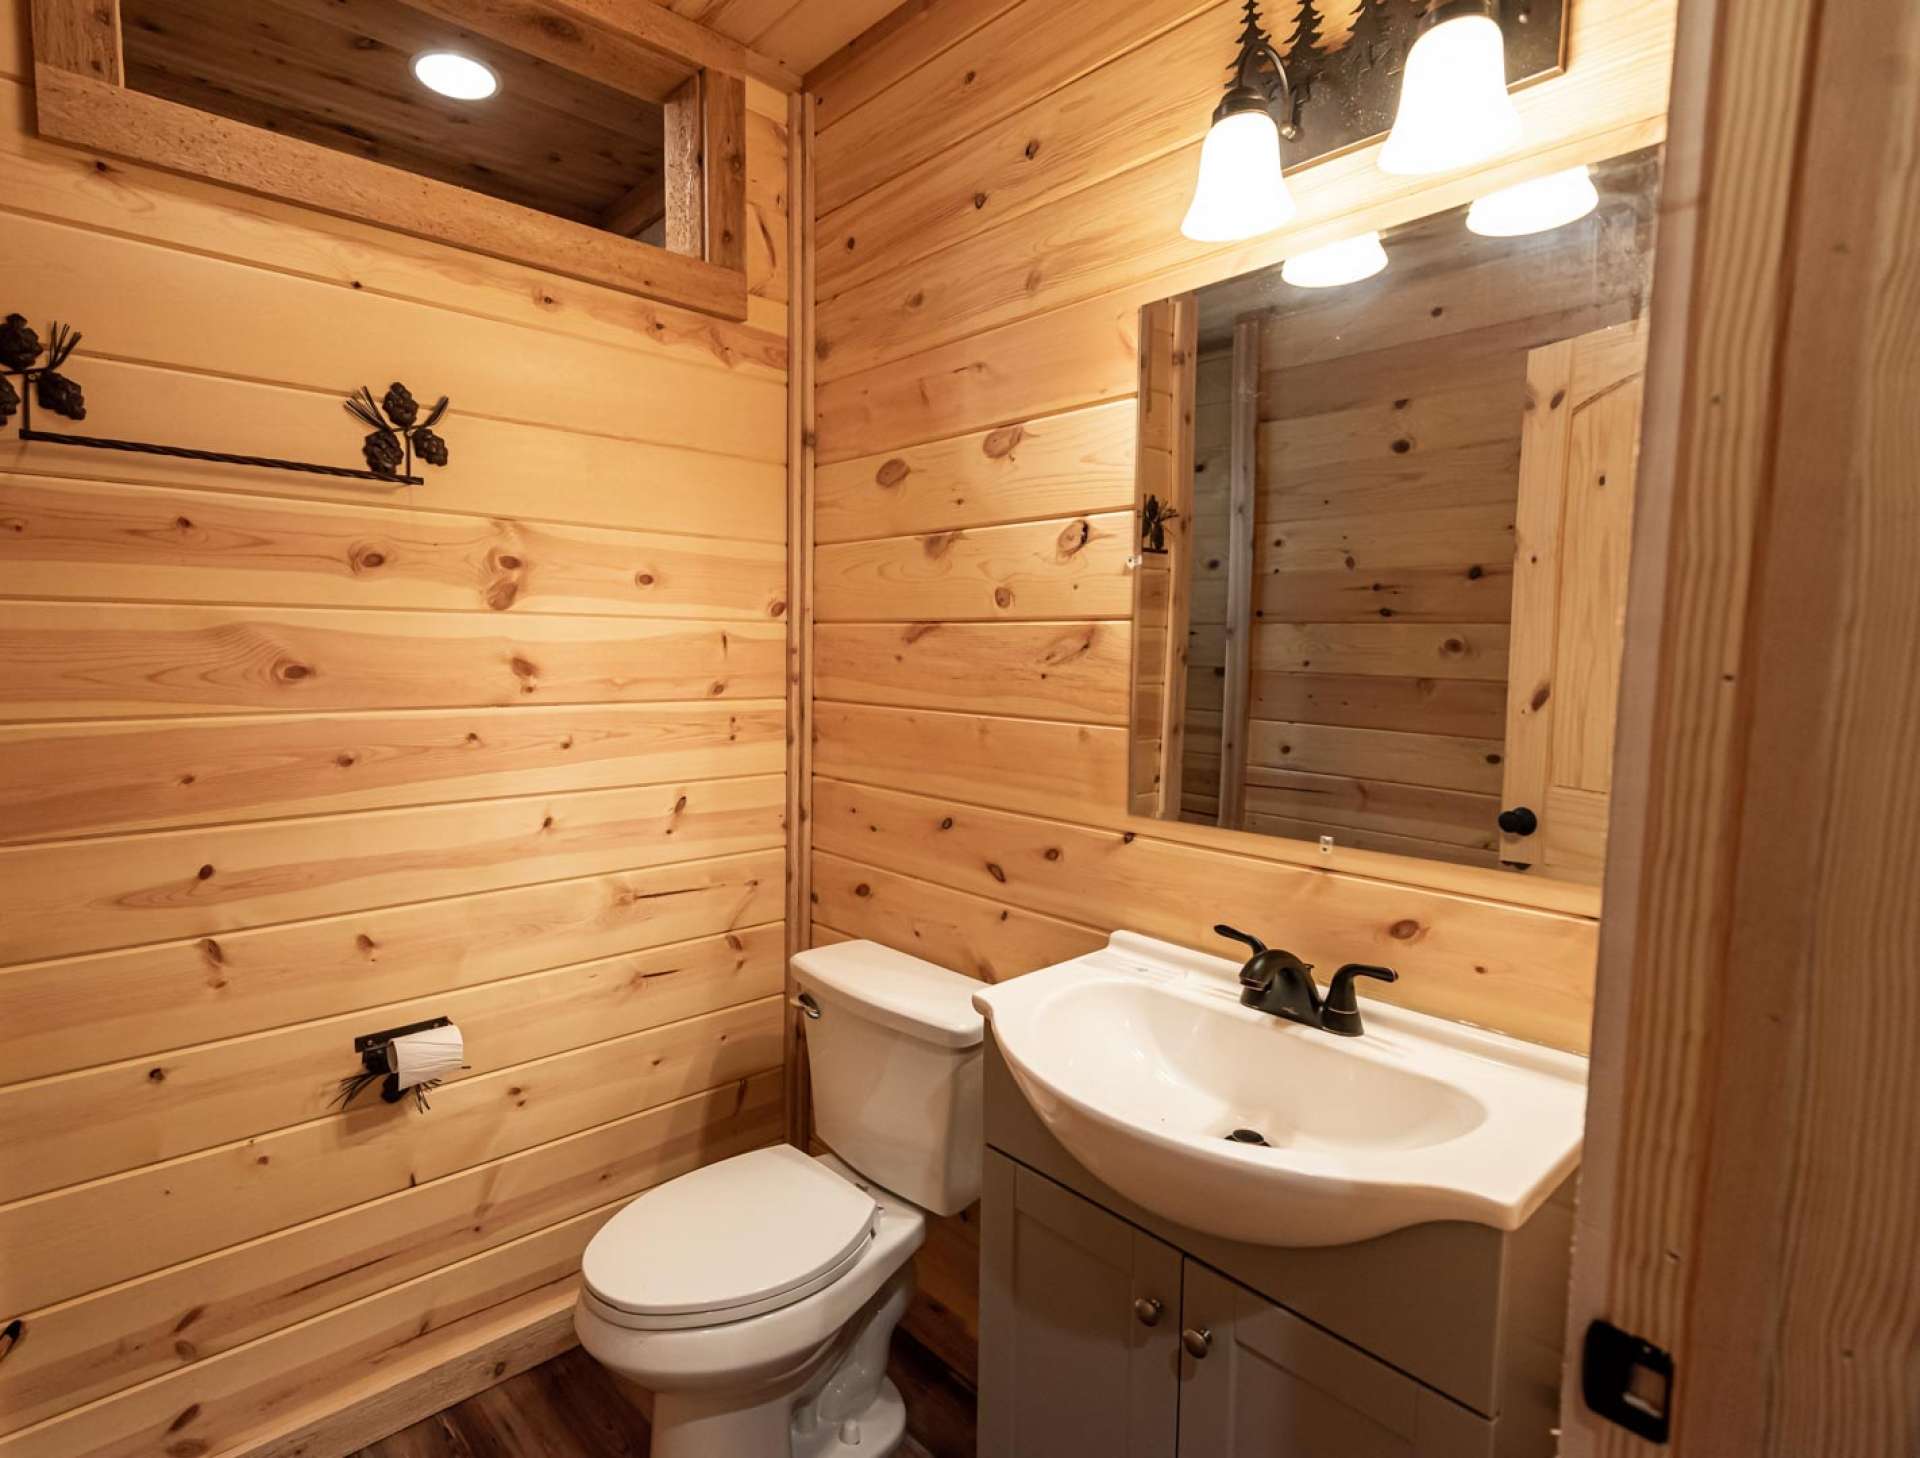 The guest bath in main cabin offers tiled floor.